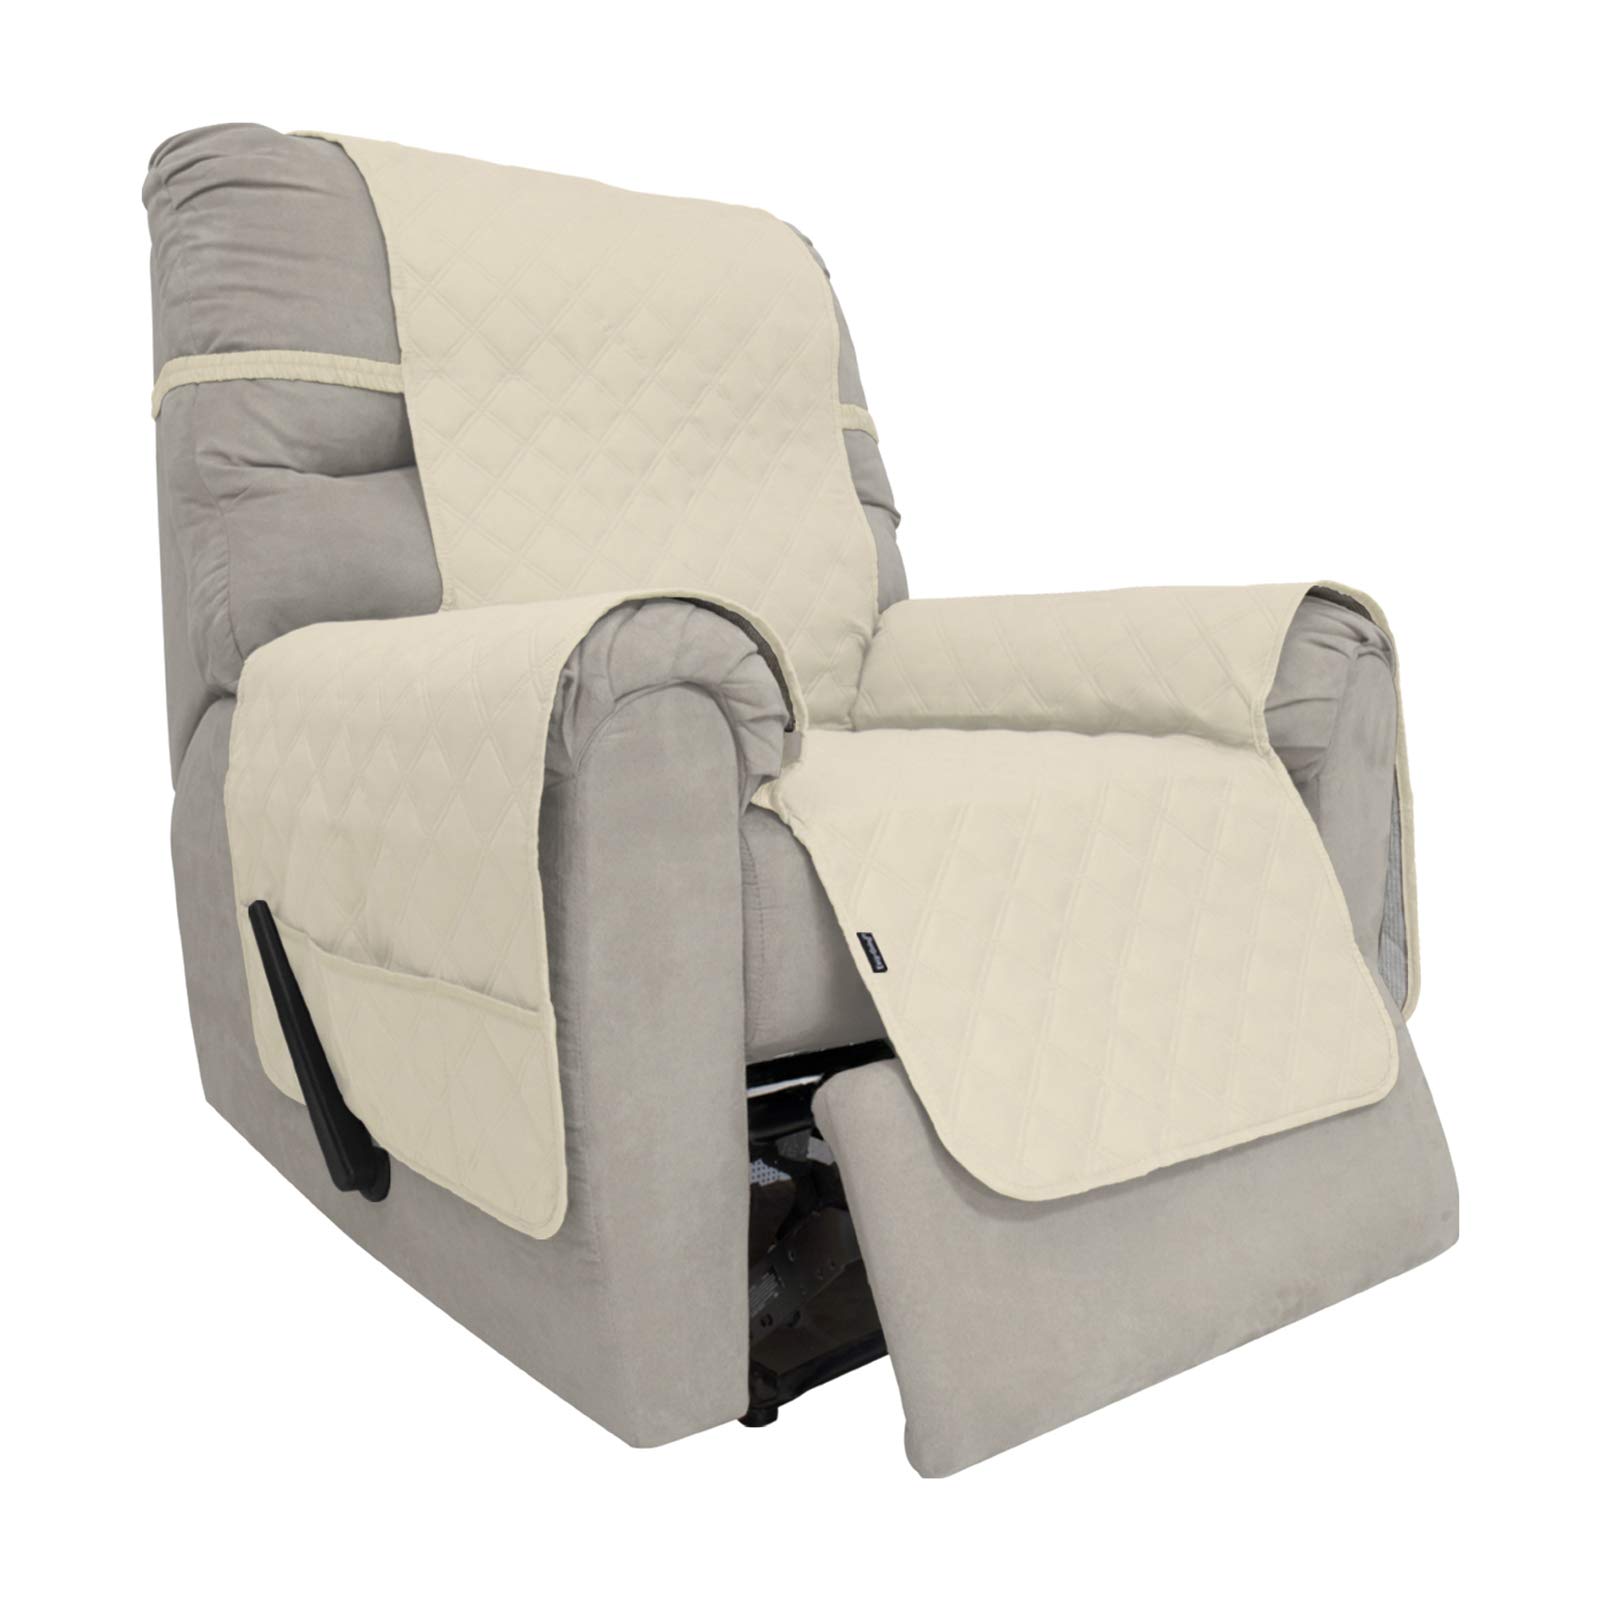 Easy-Going Sofa Slipcover Waterproof Recliner Chair Cover Non-Slip Fabric Couch Cover for Living Room Washable Furniture Protect